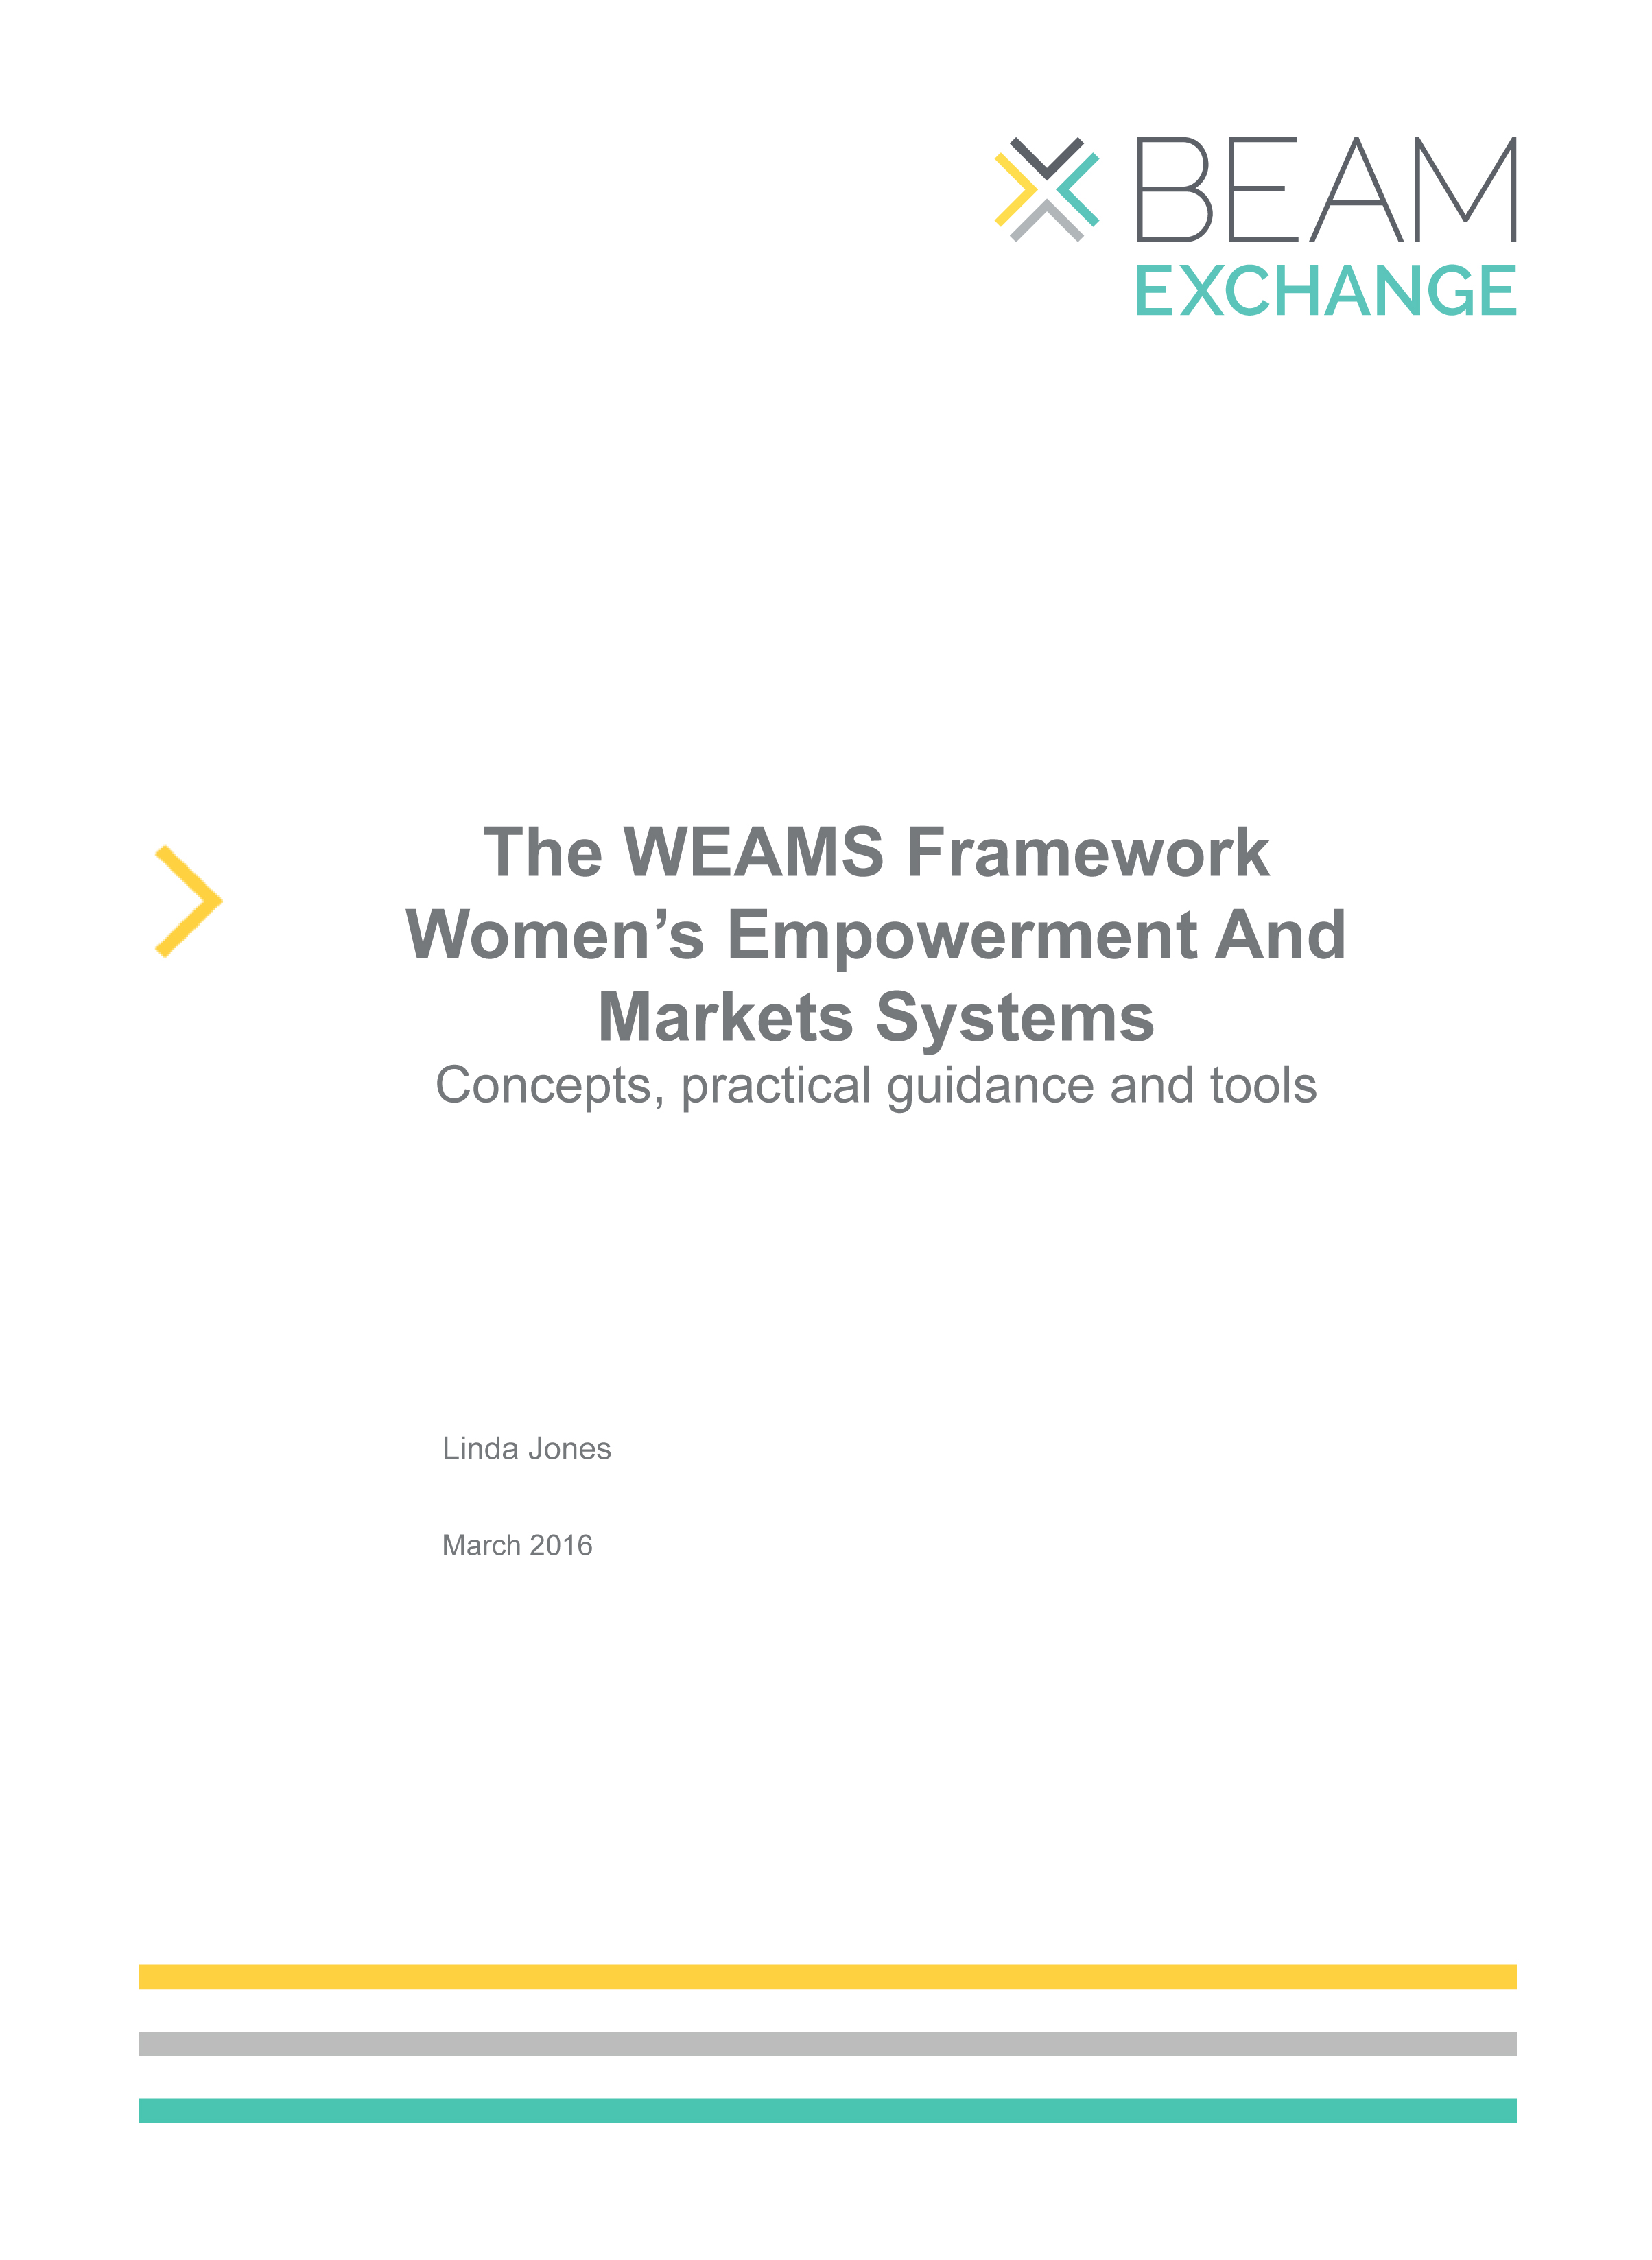 The WEAMS Framework Women’s Empowerment And Markets Systems